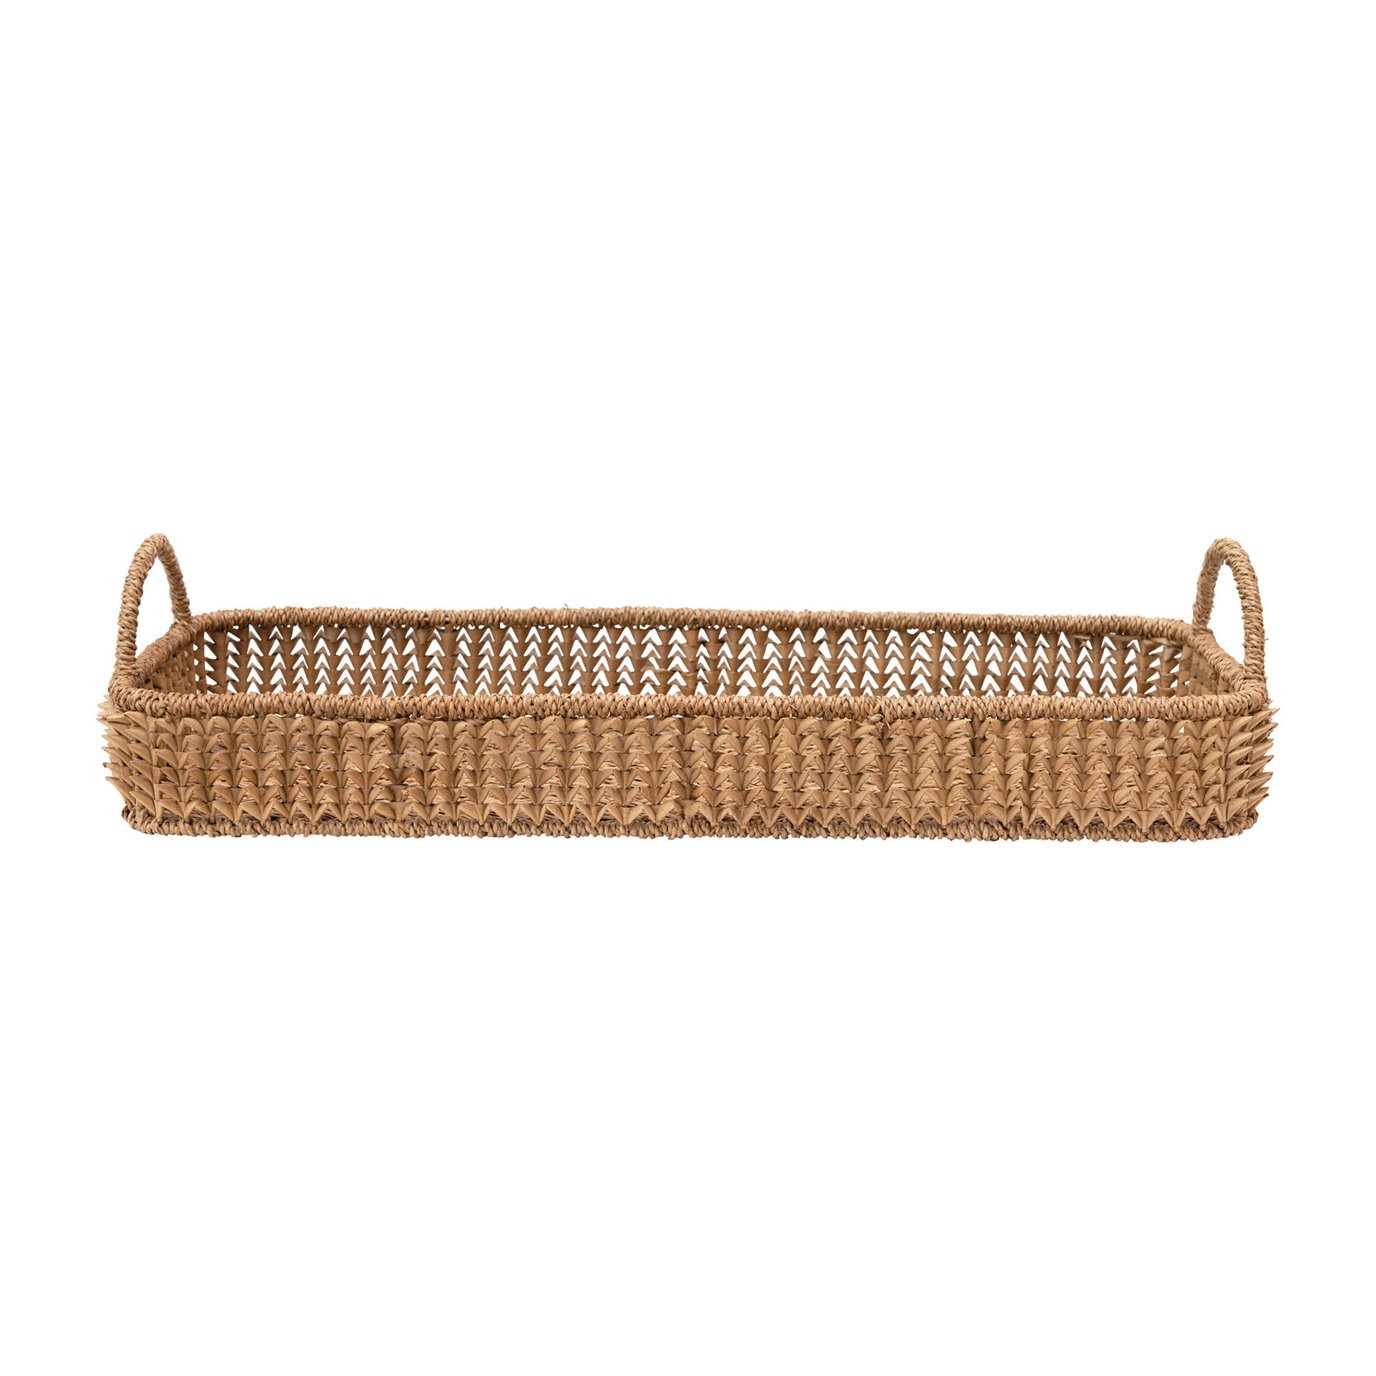 Decorative Hand-Woven Buri Palm Tray with Handles, Natural